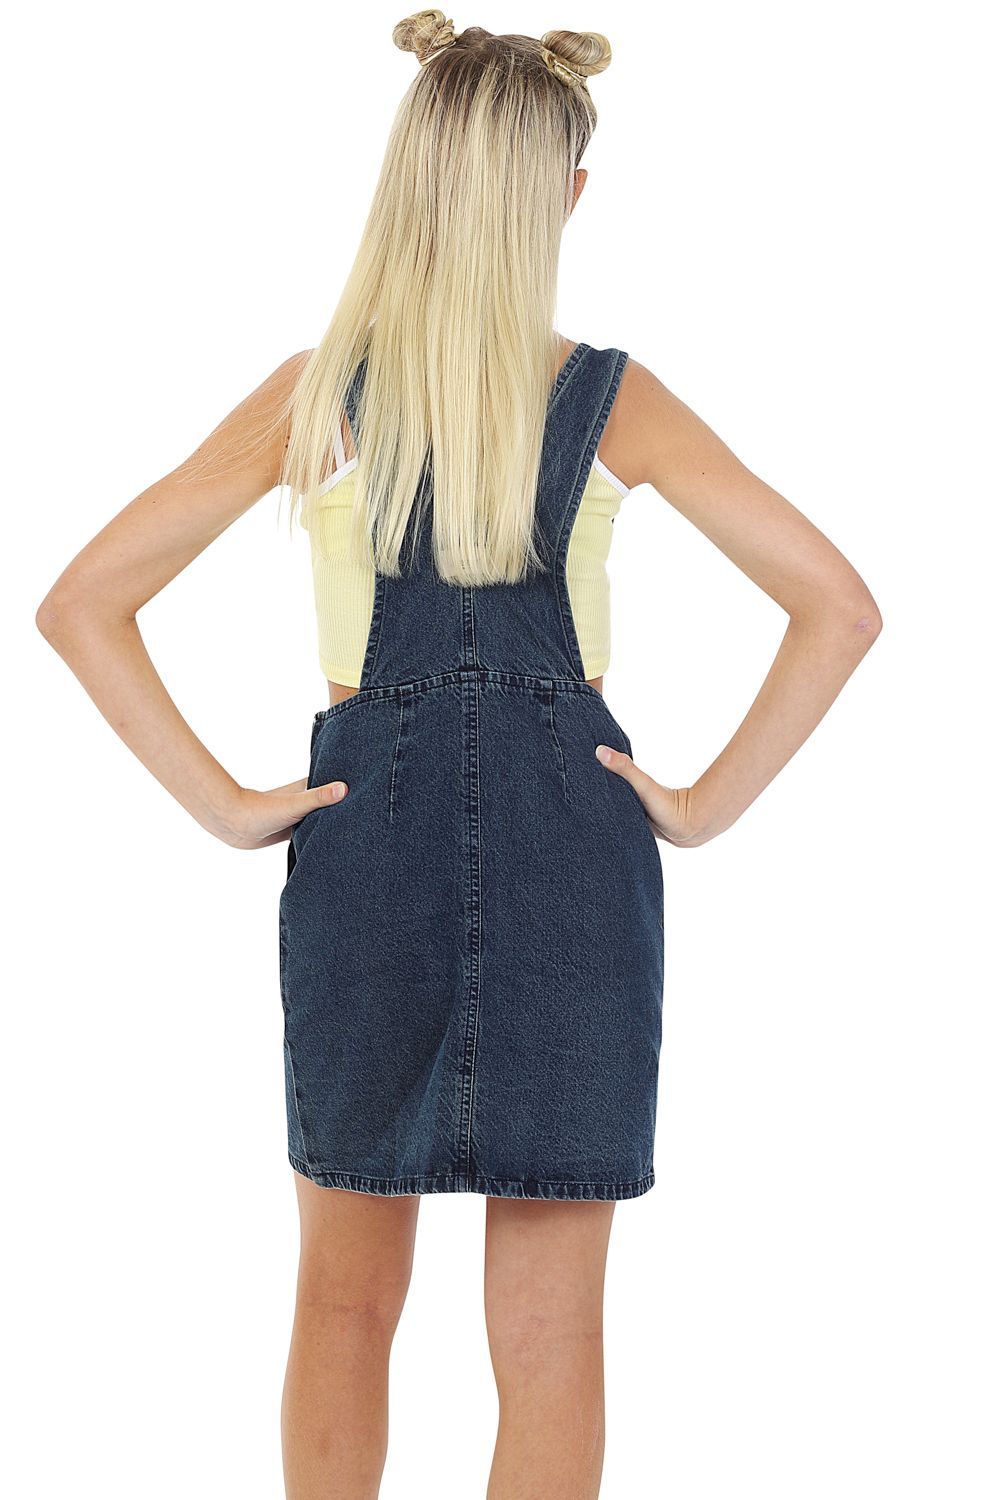 Back view of the top two-thirds of Winnie short denim dungaree dress in vintage wash, with view of back straps.